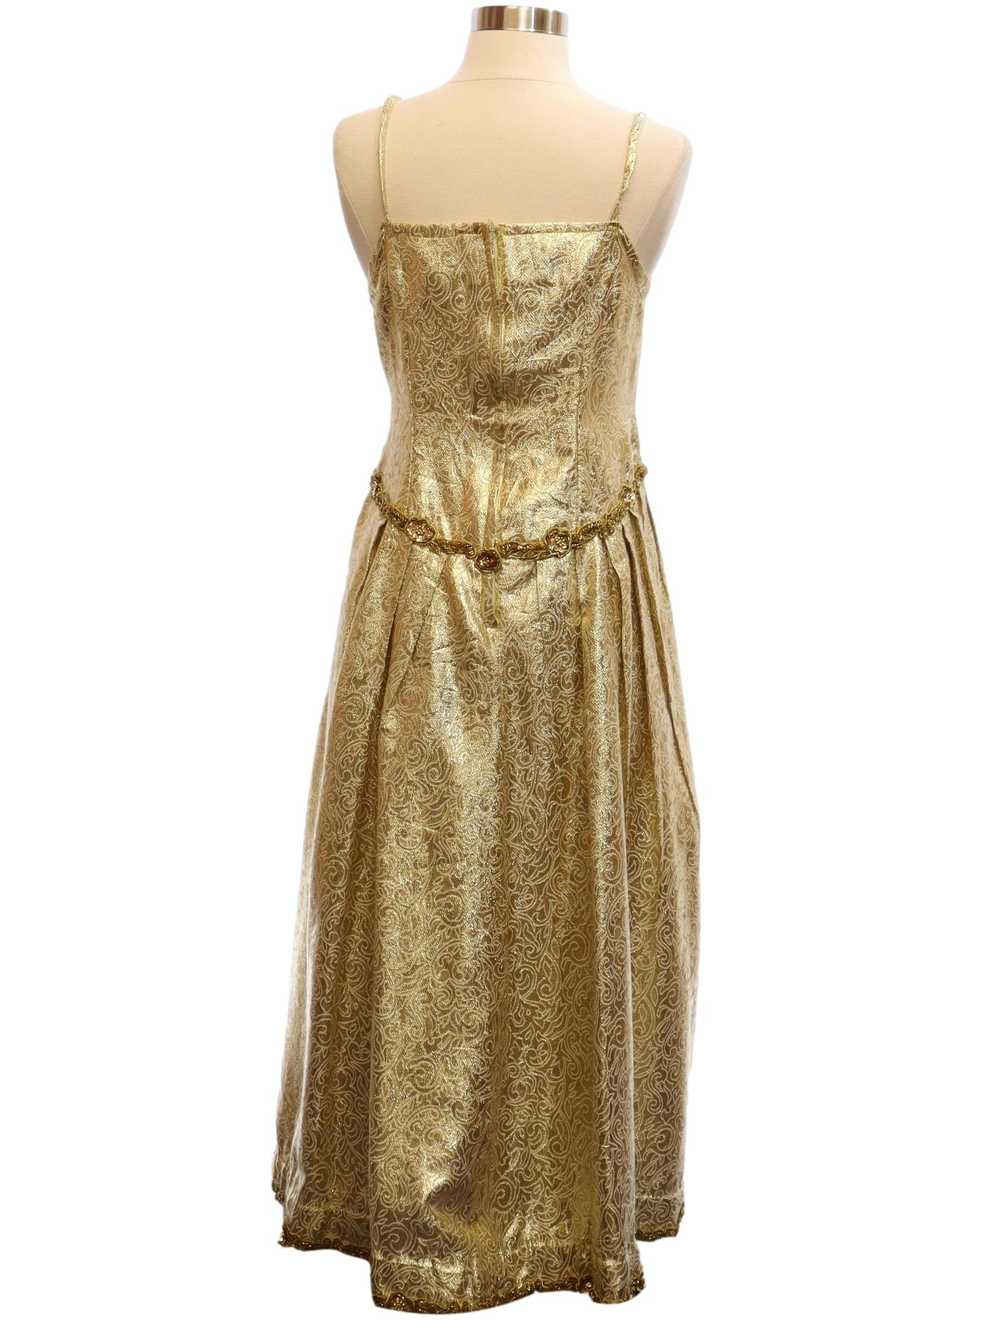 1980's Prom Or Cocktail Dress - image 3